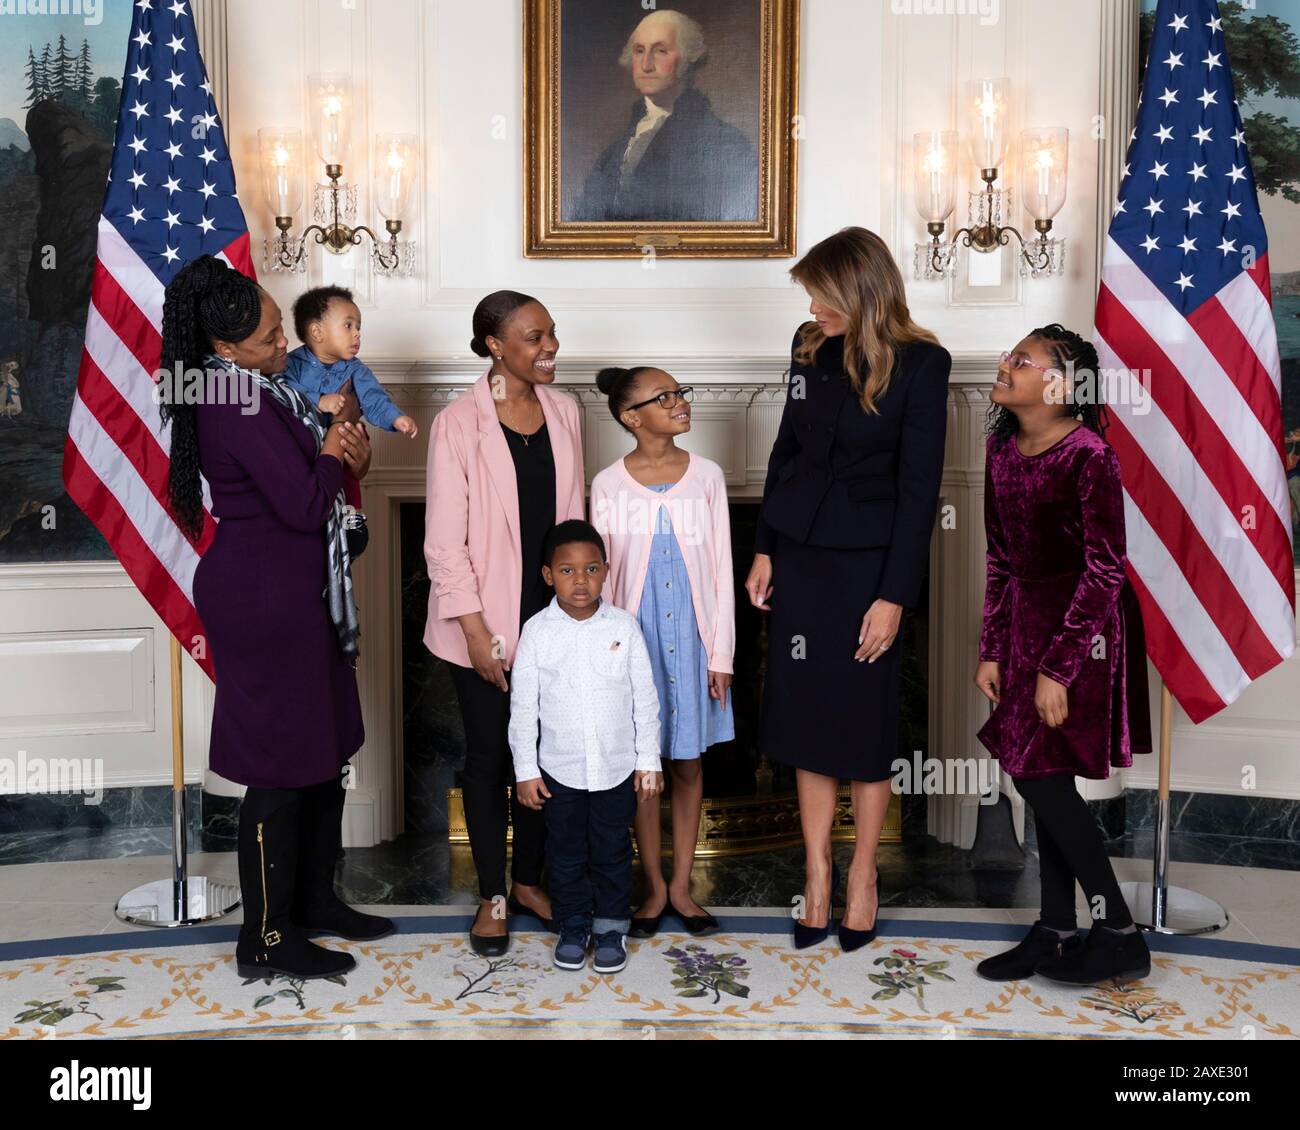 U.S First Lady Melania Trump poses with fourth grader Janiyah Davis, her mother Stephanie Davis and family members during a reception for State of the Union gallery guests in the Diplomatic Reception Room of the White House February 4, 2020 in Washington, DC. Stock Photo